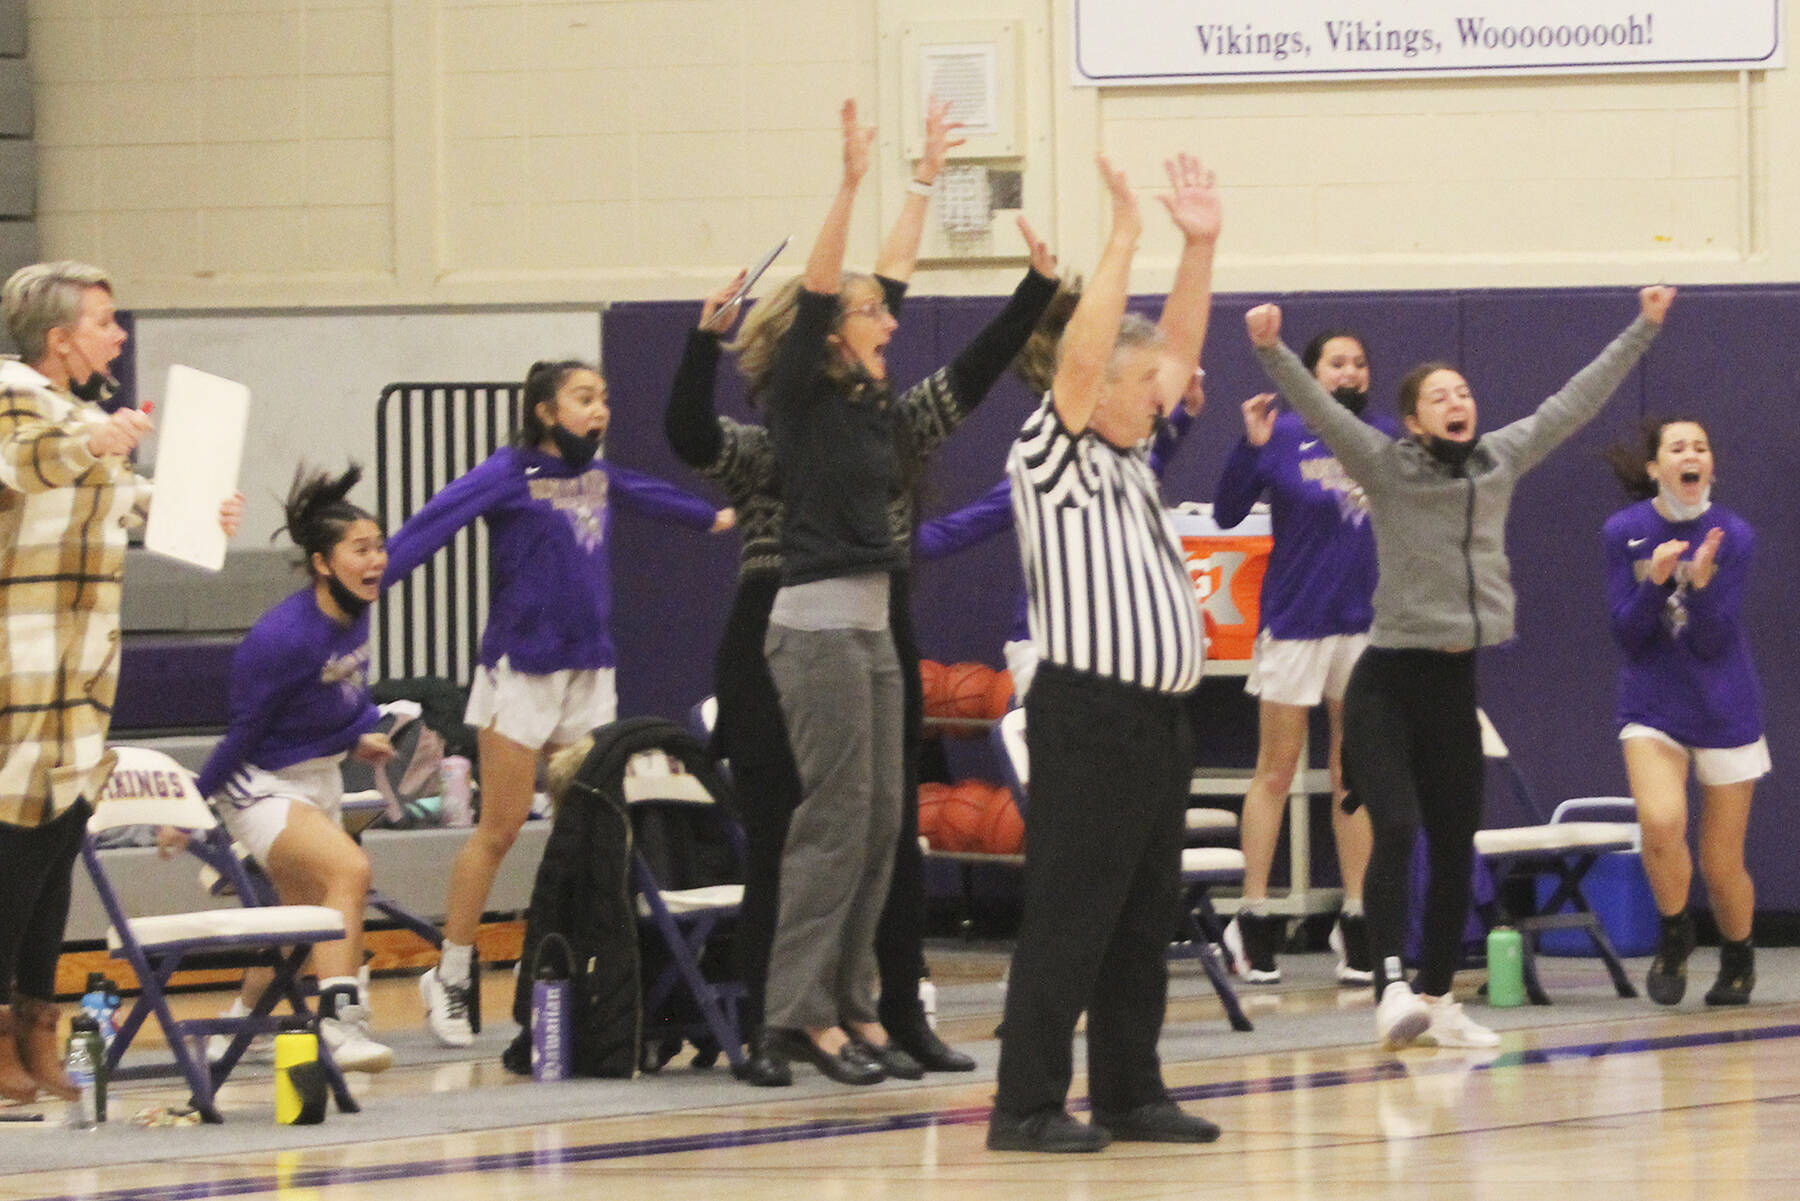 North Kitsap reacts after Evelyn Beers hit the game-winning shot at the final buzzer. Steve Powell/North Kitsap Herald photos